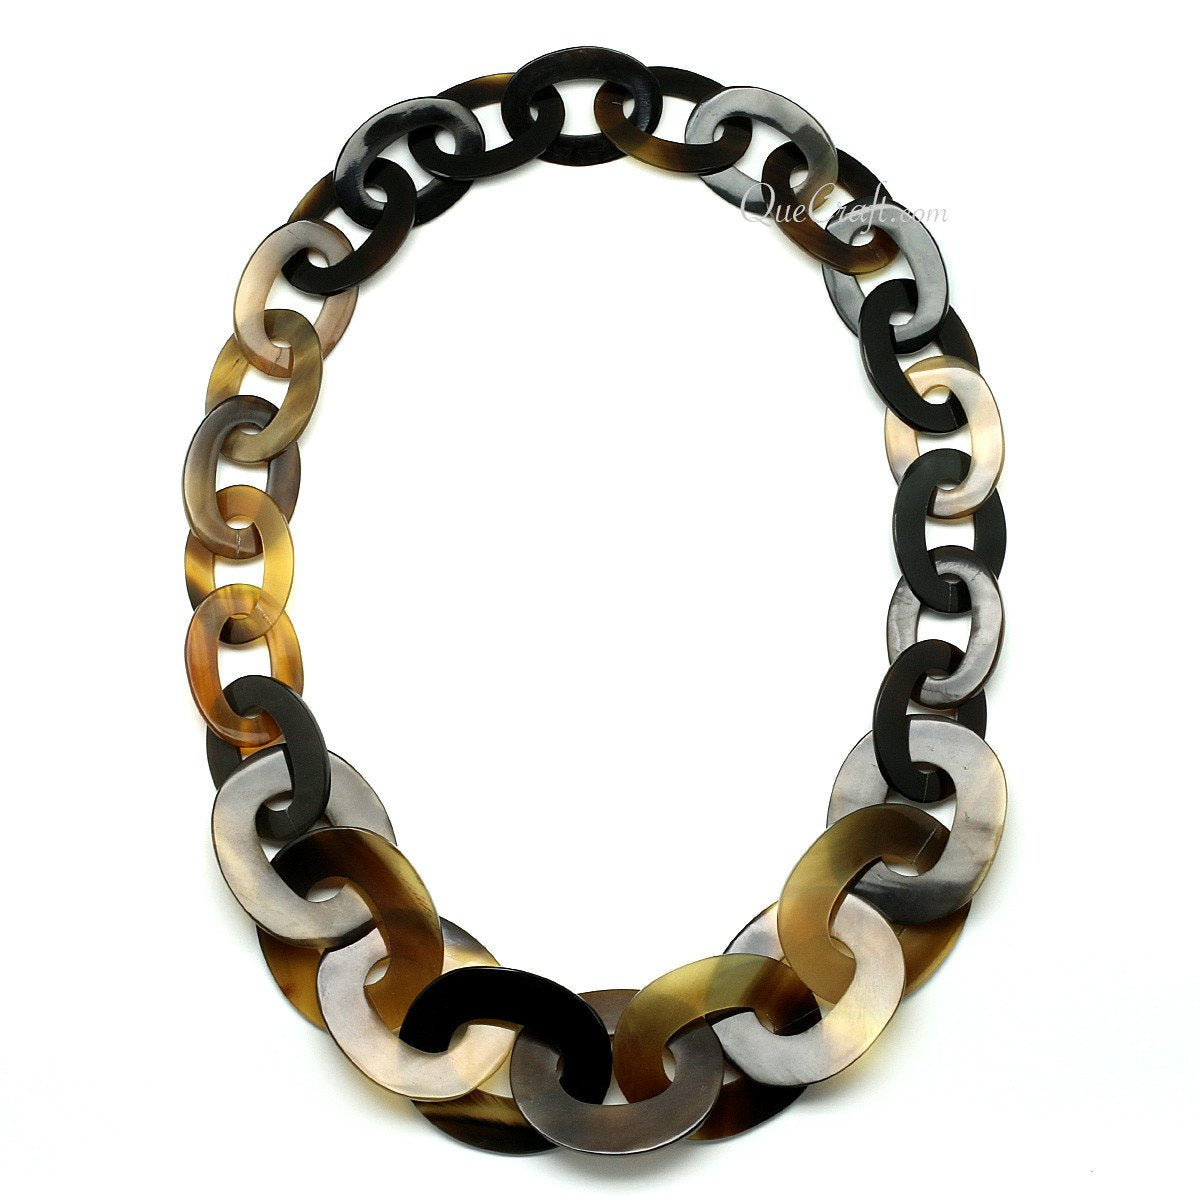 Horn Chain Necklace #11537 - HORN JEWELRY